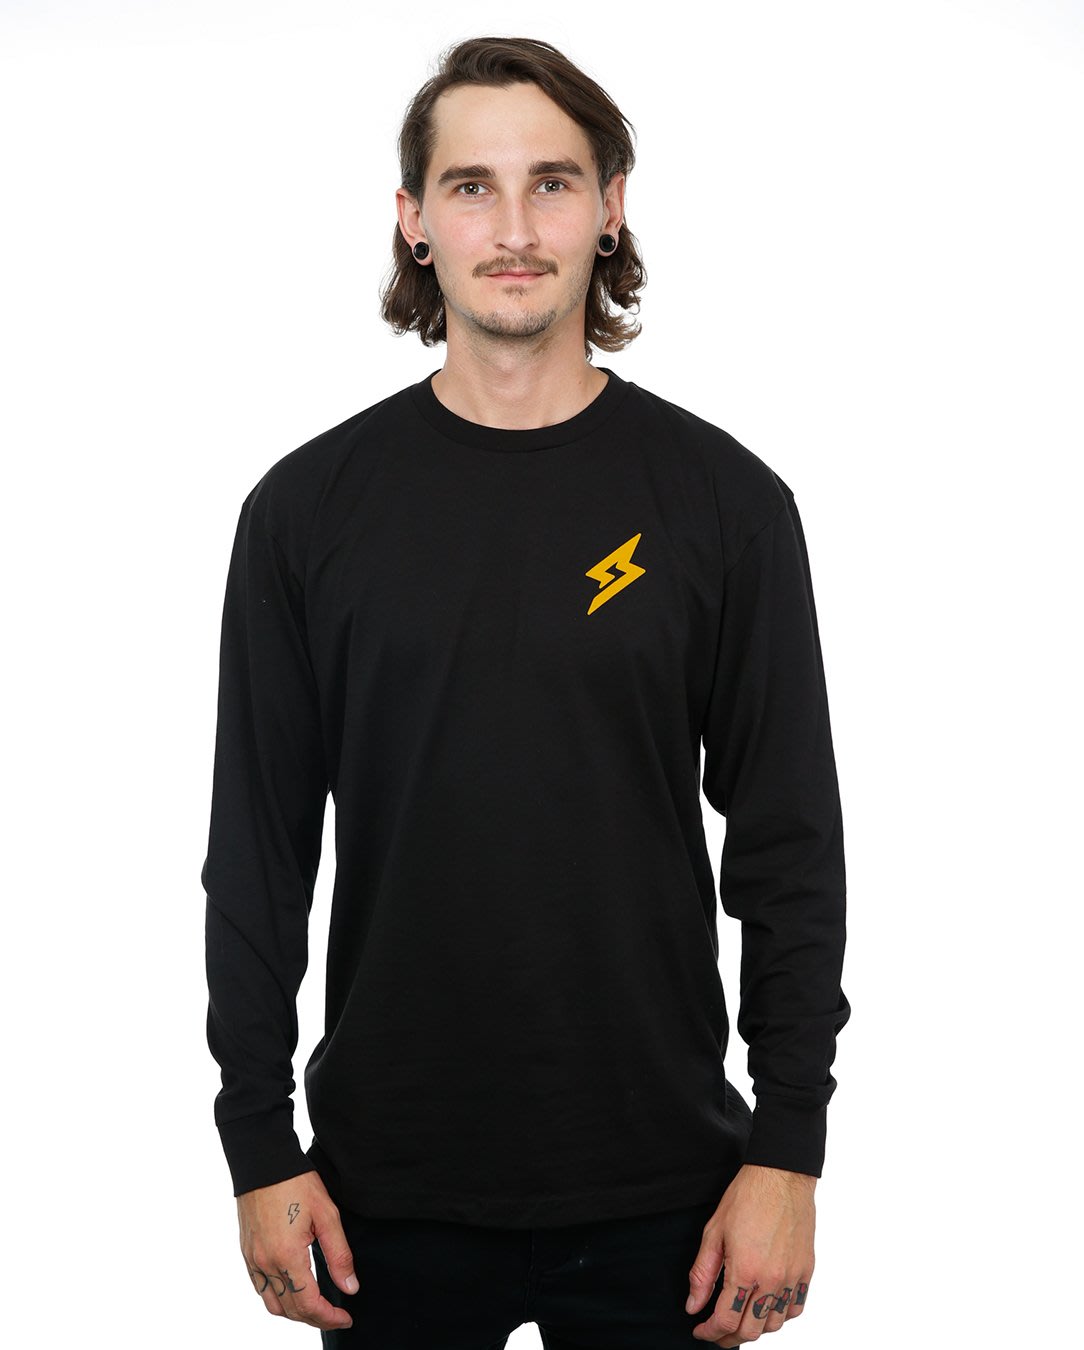 Front view of male model in Black Adventure Long Sleeve T-Shirt on white background.